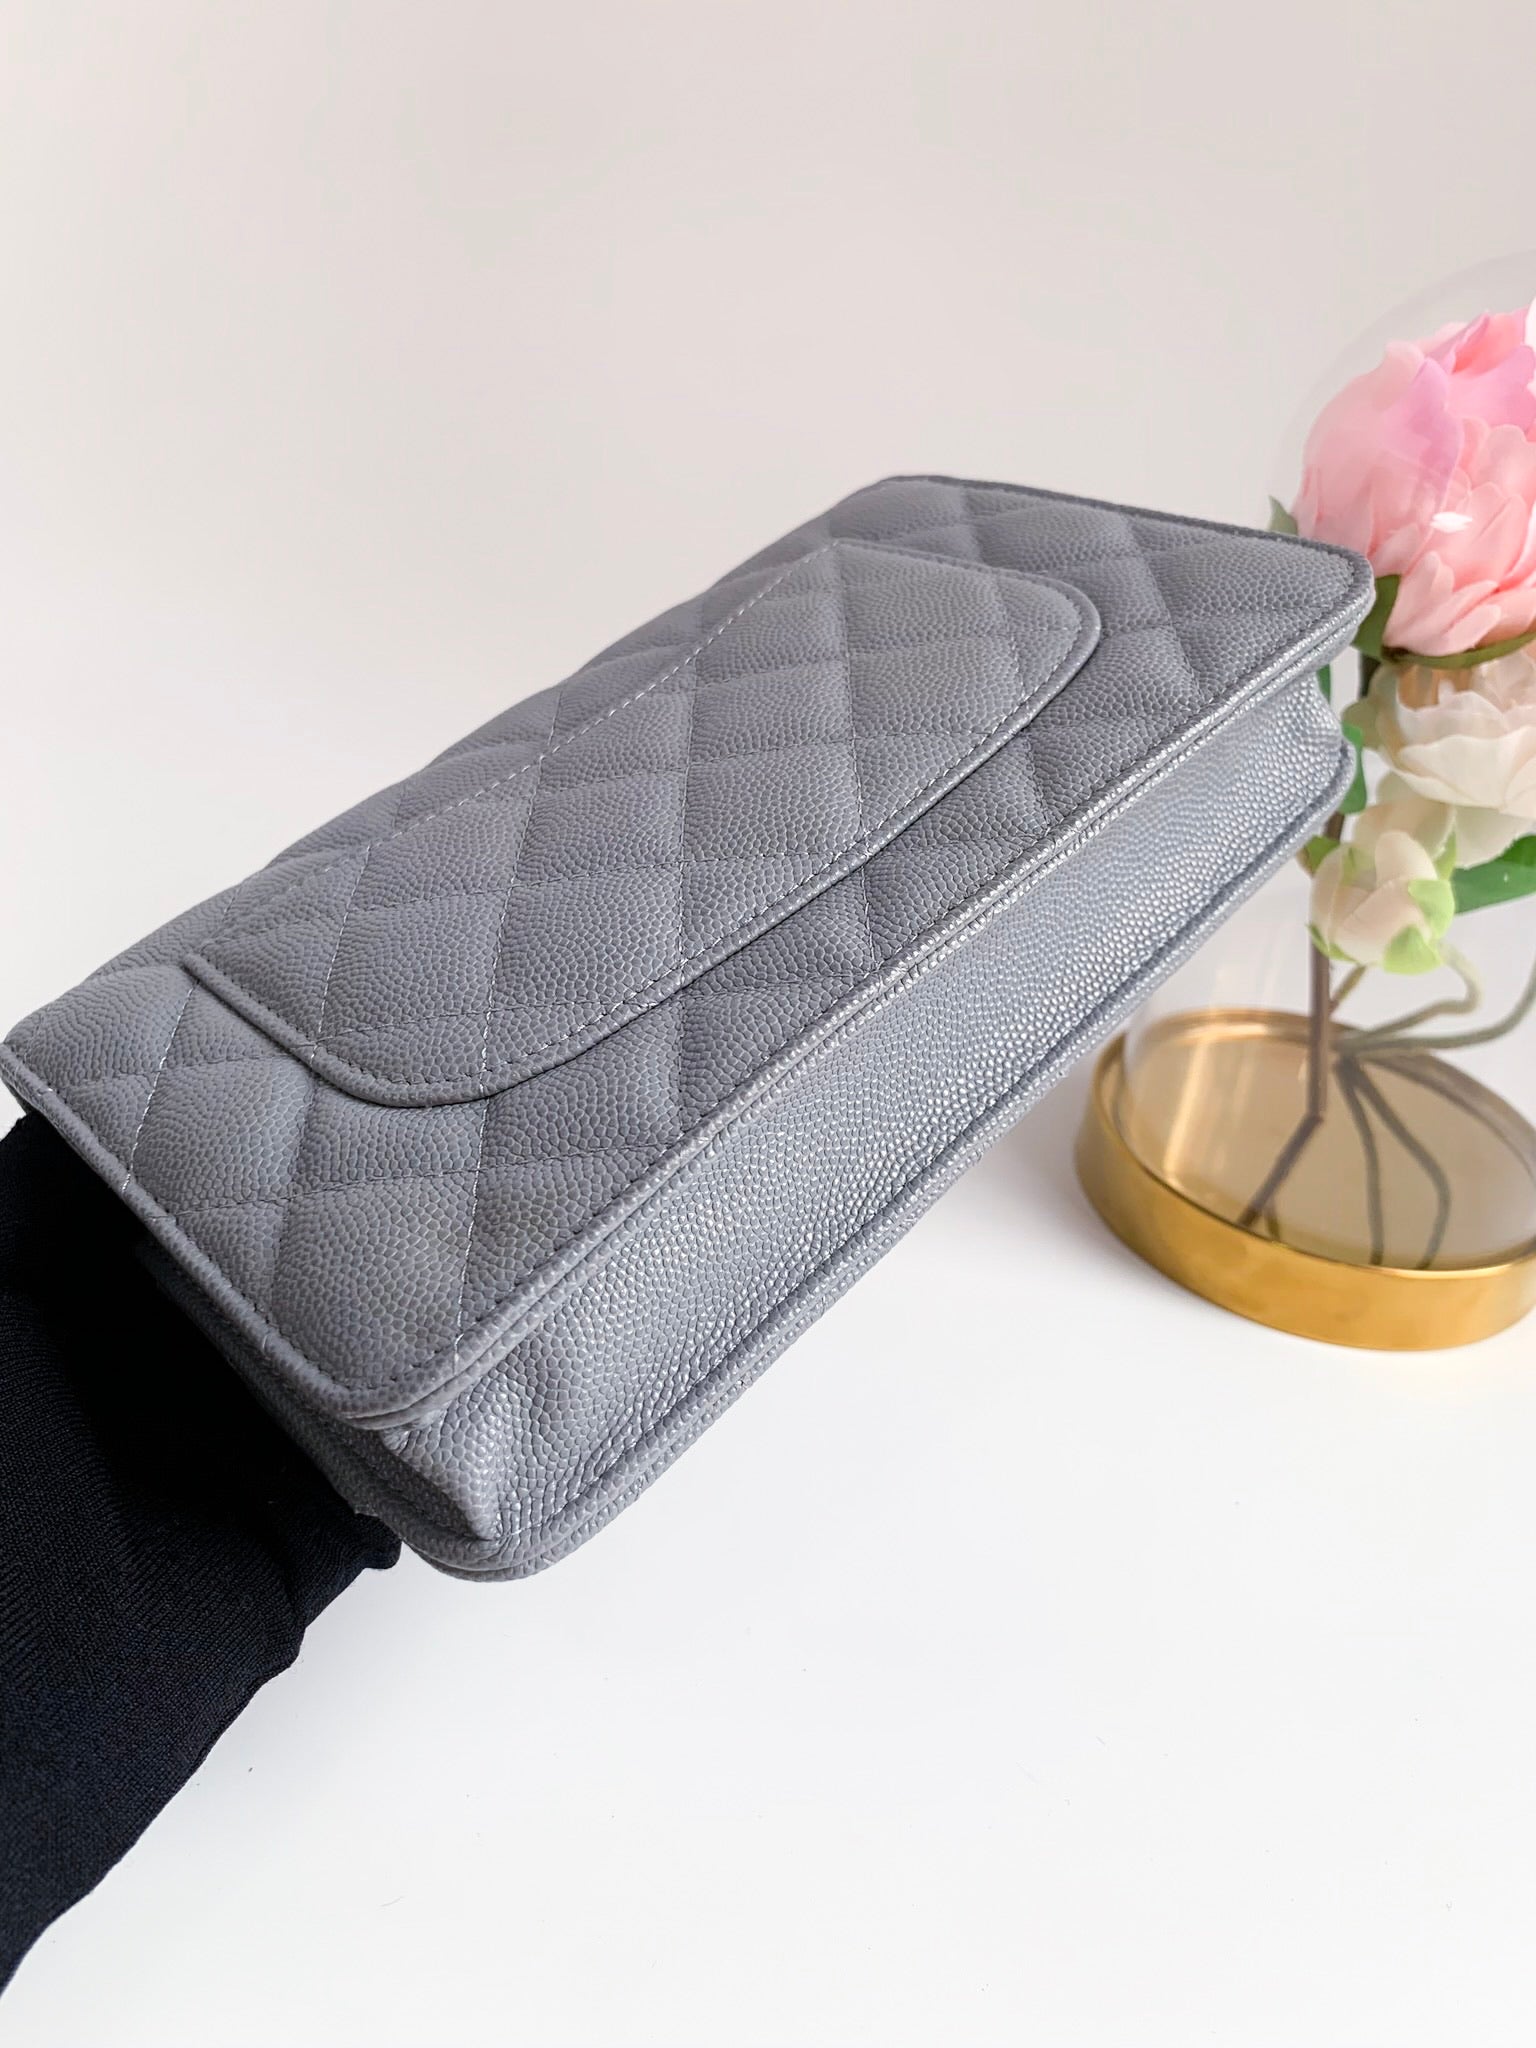 Tons of compartments…Smoke Grey Chanel Wallet from 2005 $2